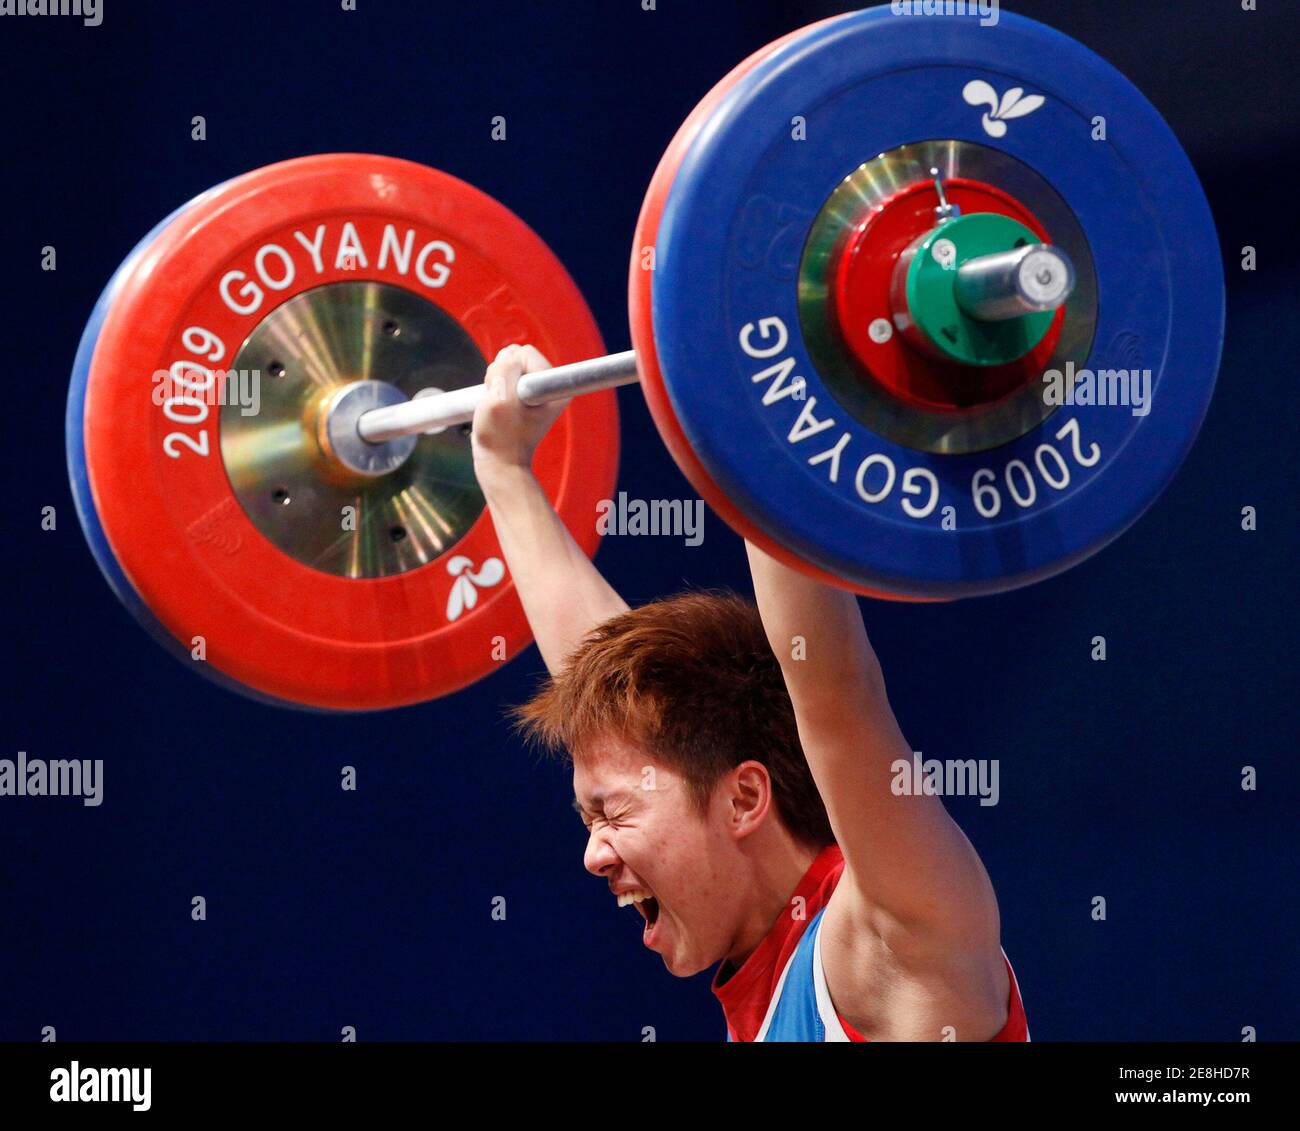 Lin Wan-hsuan of Taiwan competes in the women's 58kg Group A weightlifting clean and jerk competition at the World Weightlifting Championship in Goyang, north of Seoul, November 23, 2009.  REUTERS/Jo Yong-Hak (SOUTH KOREA SPORT WEIGHTLIFTING) Stock Photo